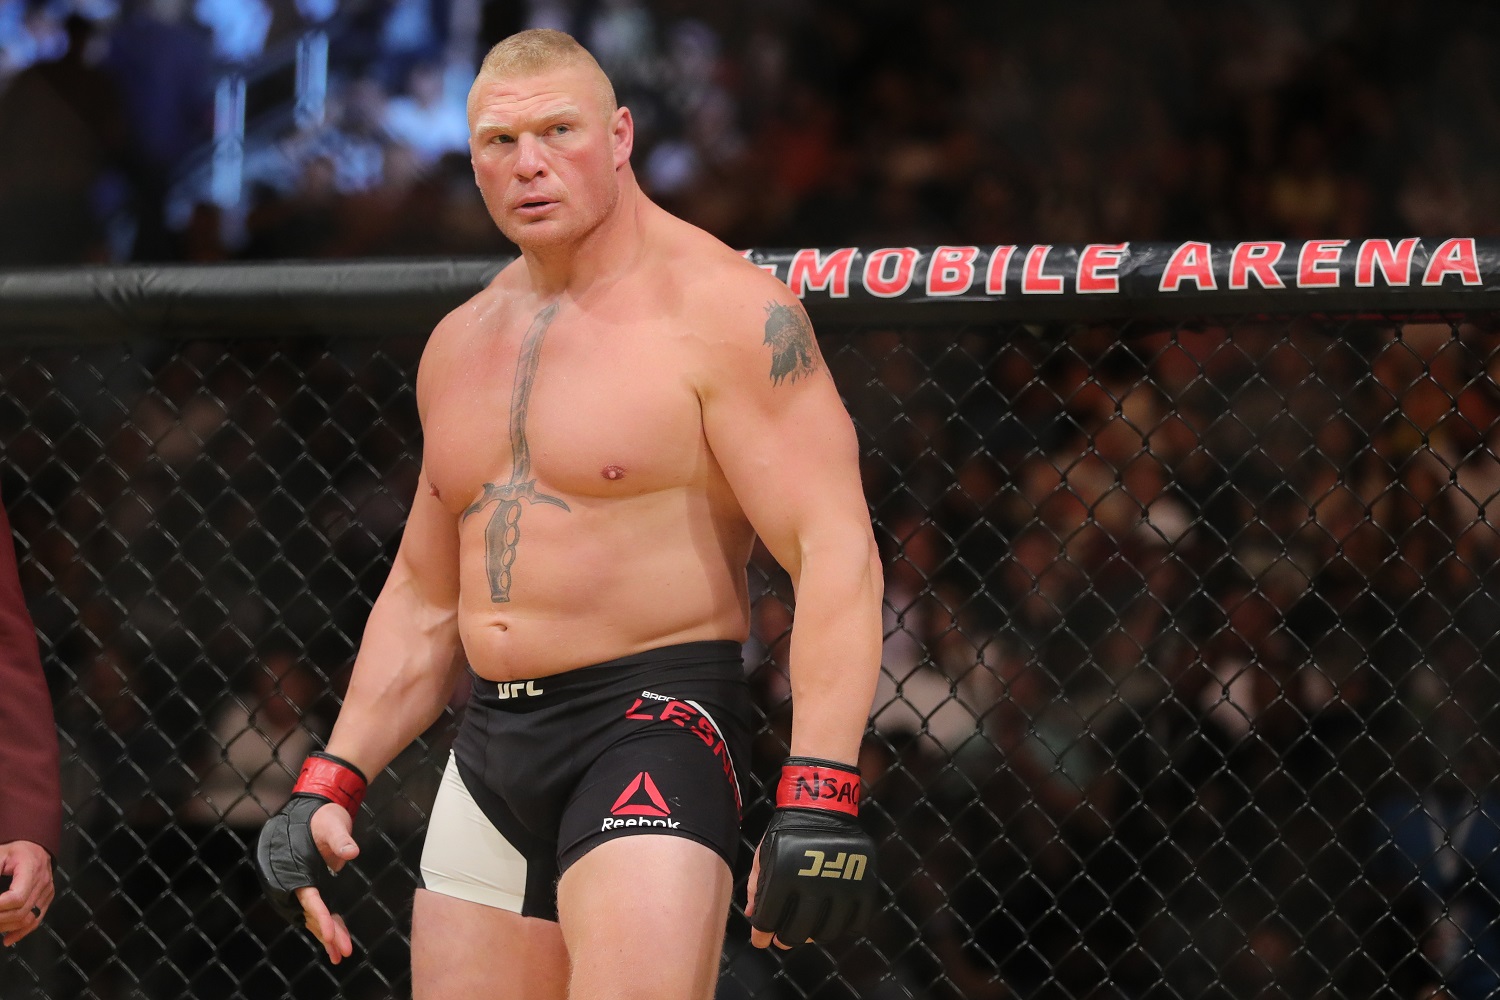 With Brock Lesnar No Longer Under Contract To WWE, Bellator Is Looking To Bring Him in for a Huge Dream Match